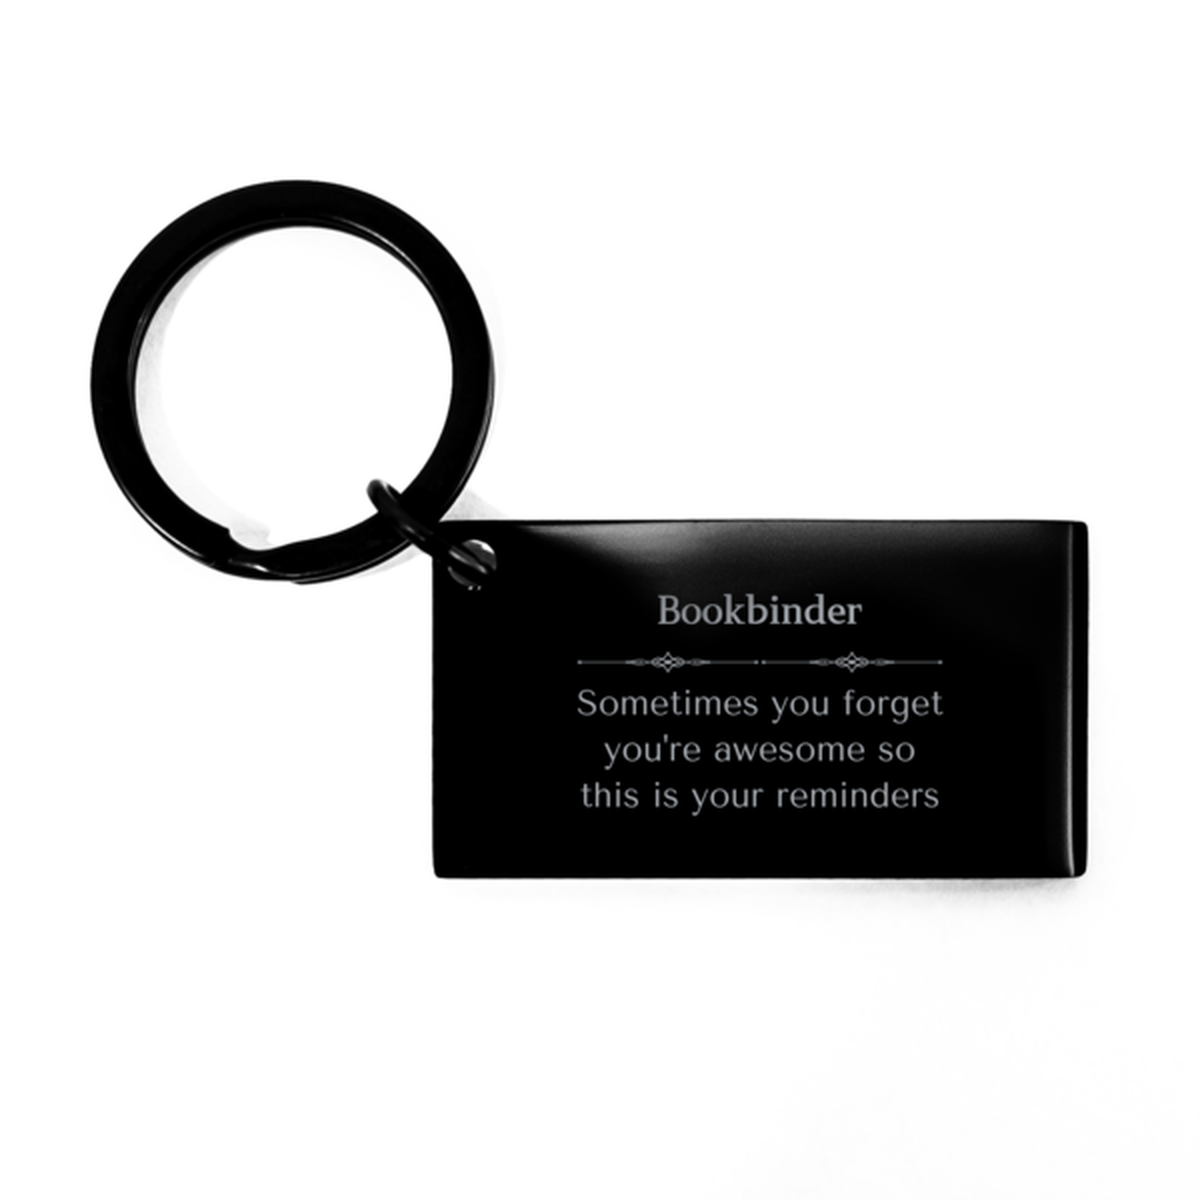 Sentimental Bookbinder Keychain, Database Administrator Sometimes you forget you're awesome so this is your reminders, Graduation Christmas Birthday Gifts for Bookbinder, Men, Women, Coworkers